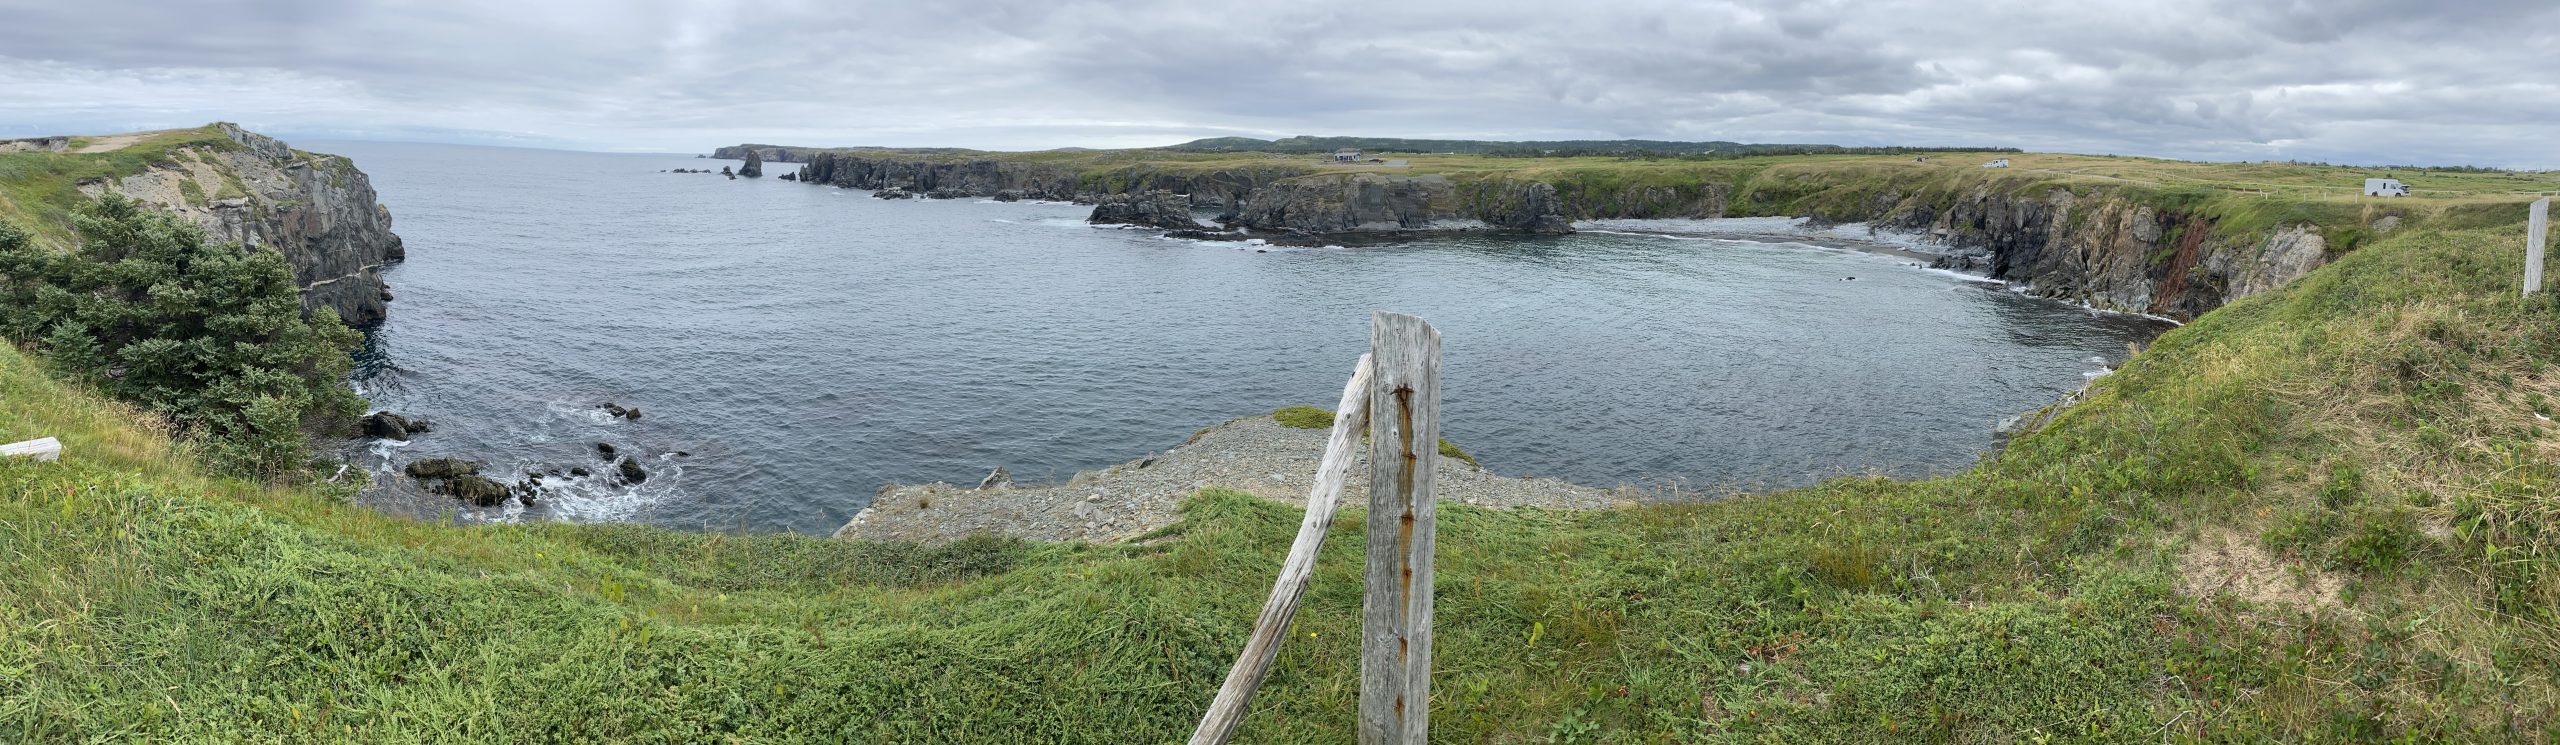 A panoramic view of the coastline at Dungeon Provincial Park on the Bonavista Peninsula in Newfoundland.